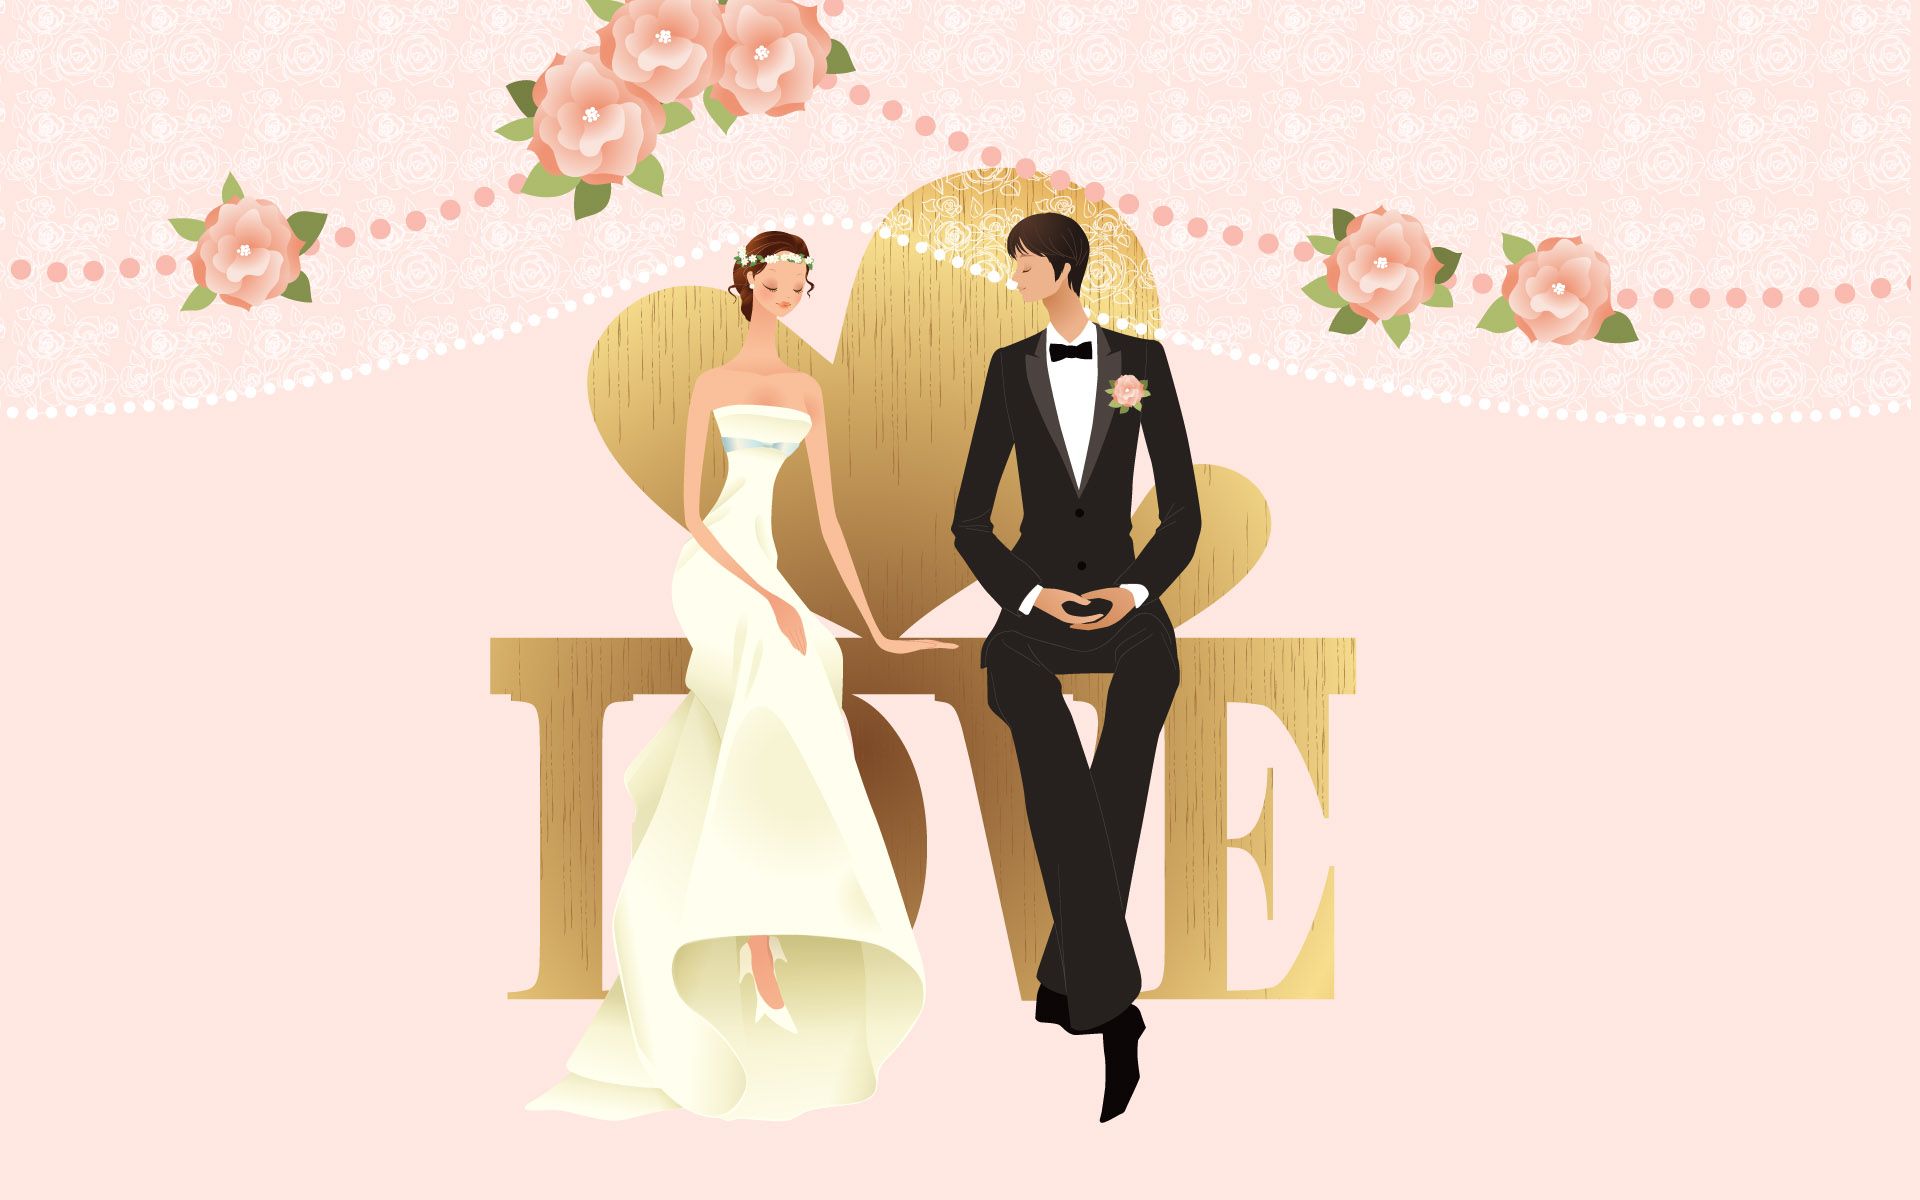 Free Wedding Couple Cartoon Image, Download Free Clip Art, Free Clip Art on Clipart Library